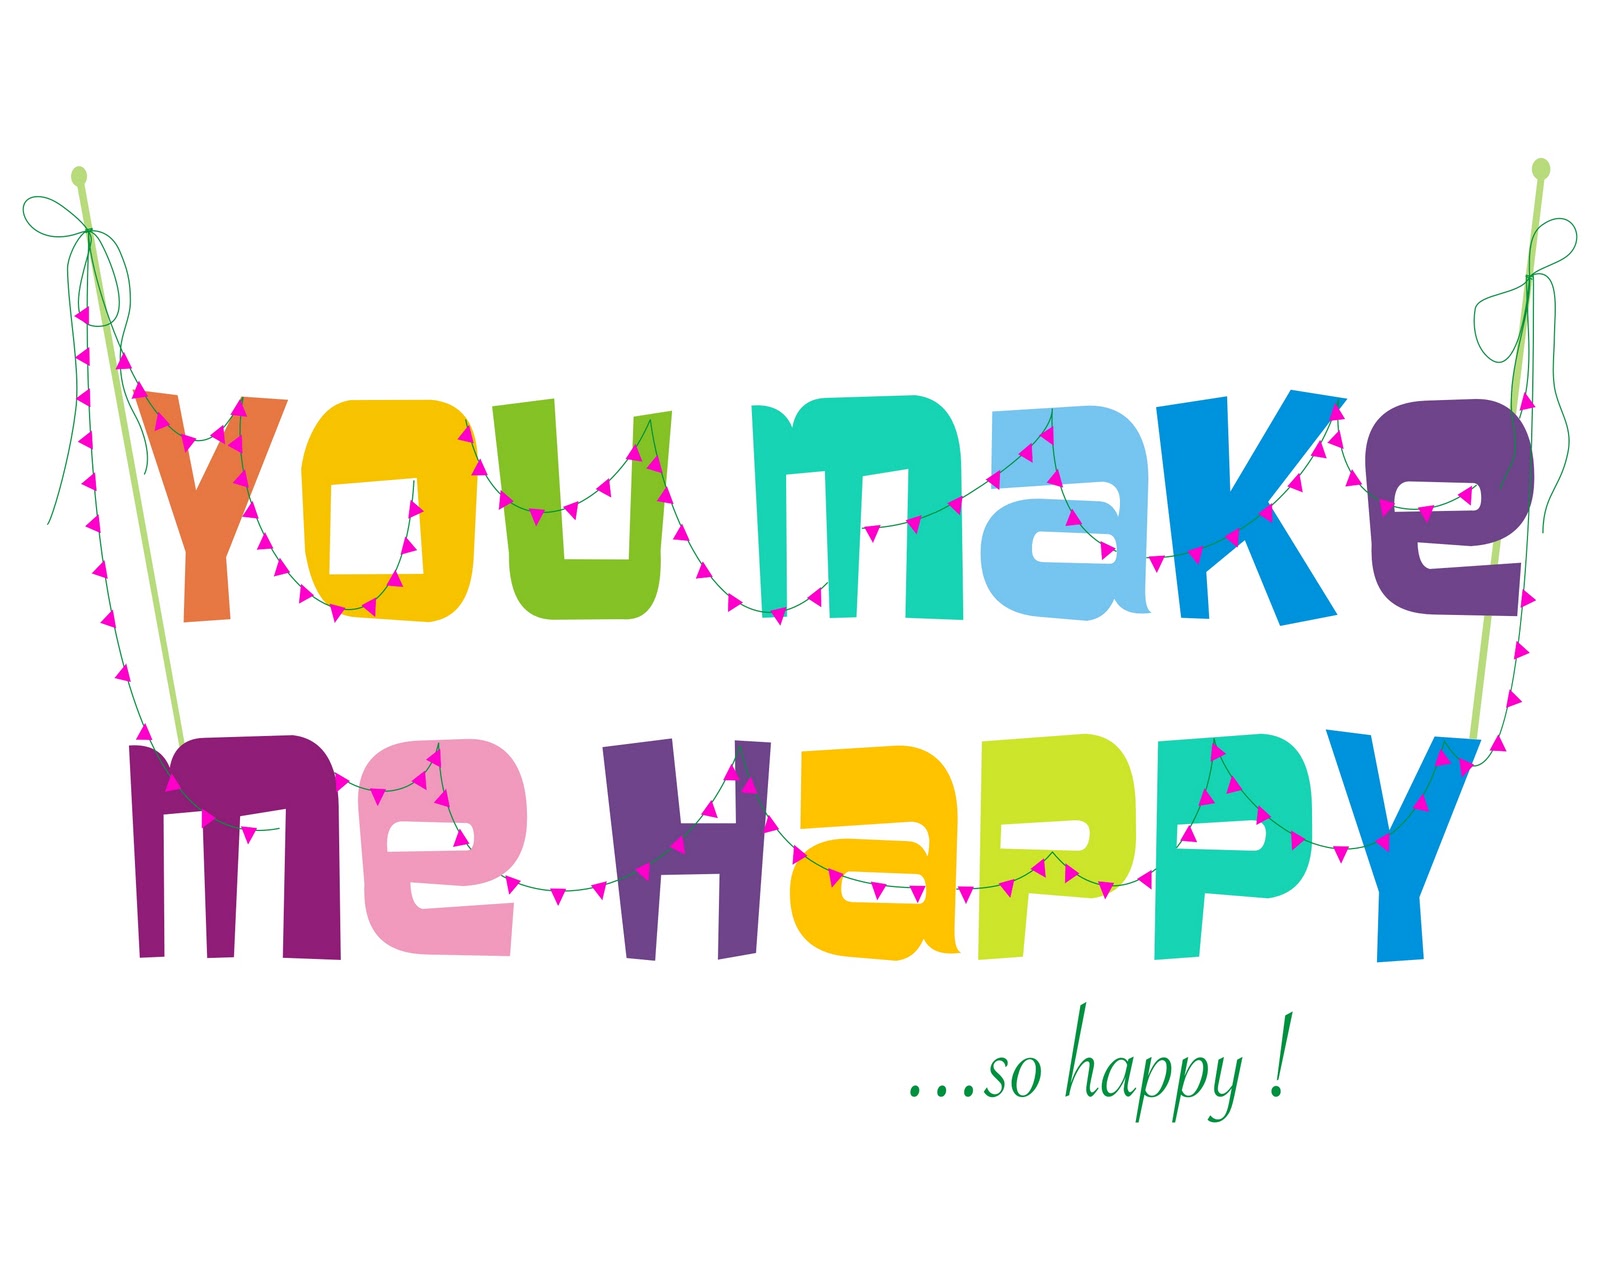 Are you happy yes. You make me Happy. Картину в i am Happy. I am Happy картинки. You make me Happy картинки.